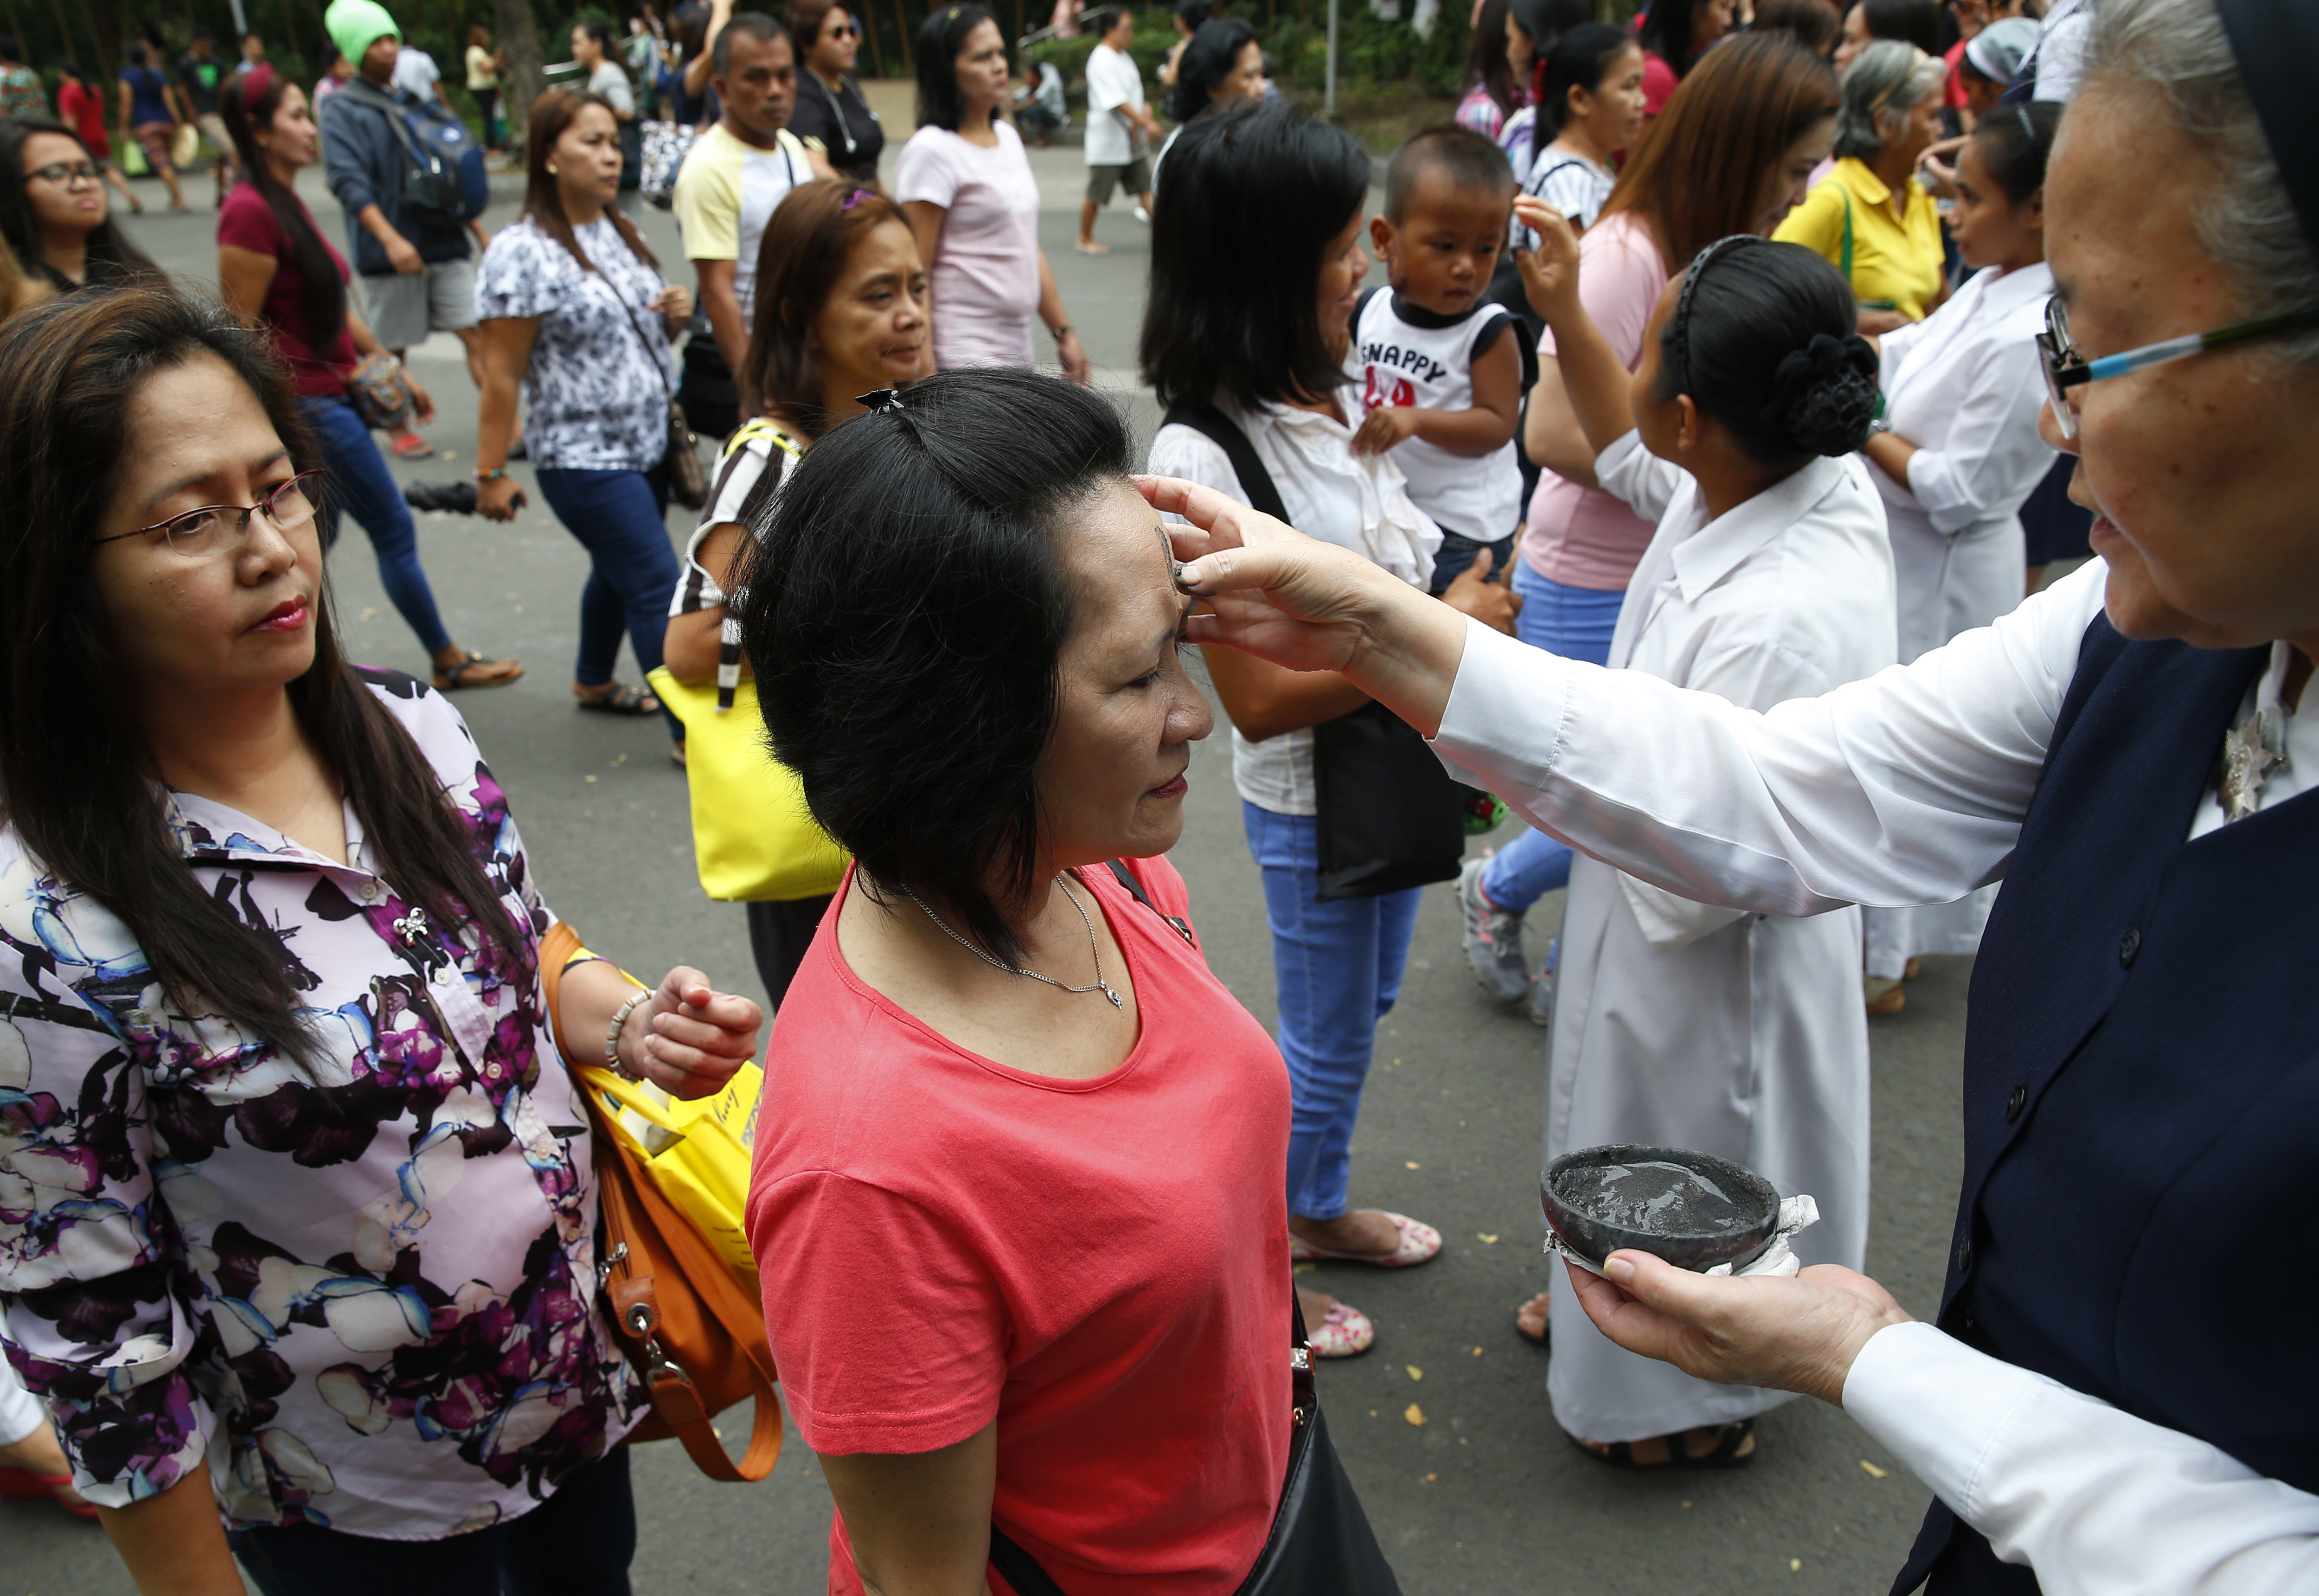 Roman Catholic devotees have their foreheads rubbed with ash in observance of Ash Wednesday which ushers the season of Lent and also coincides with Valentine's Day celebration Wednesday, Feb. 14, 2018, in Paranaque southeast of Manila, Philippines. Ash Wednesday is observed all over the world by Roman Catholics to remind mankind that God created humans from dust. (AP Photo/Bullit Marquez)